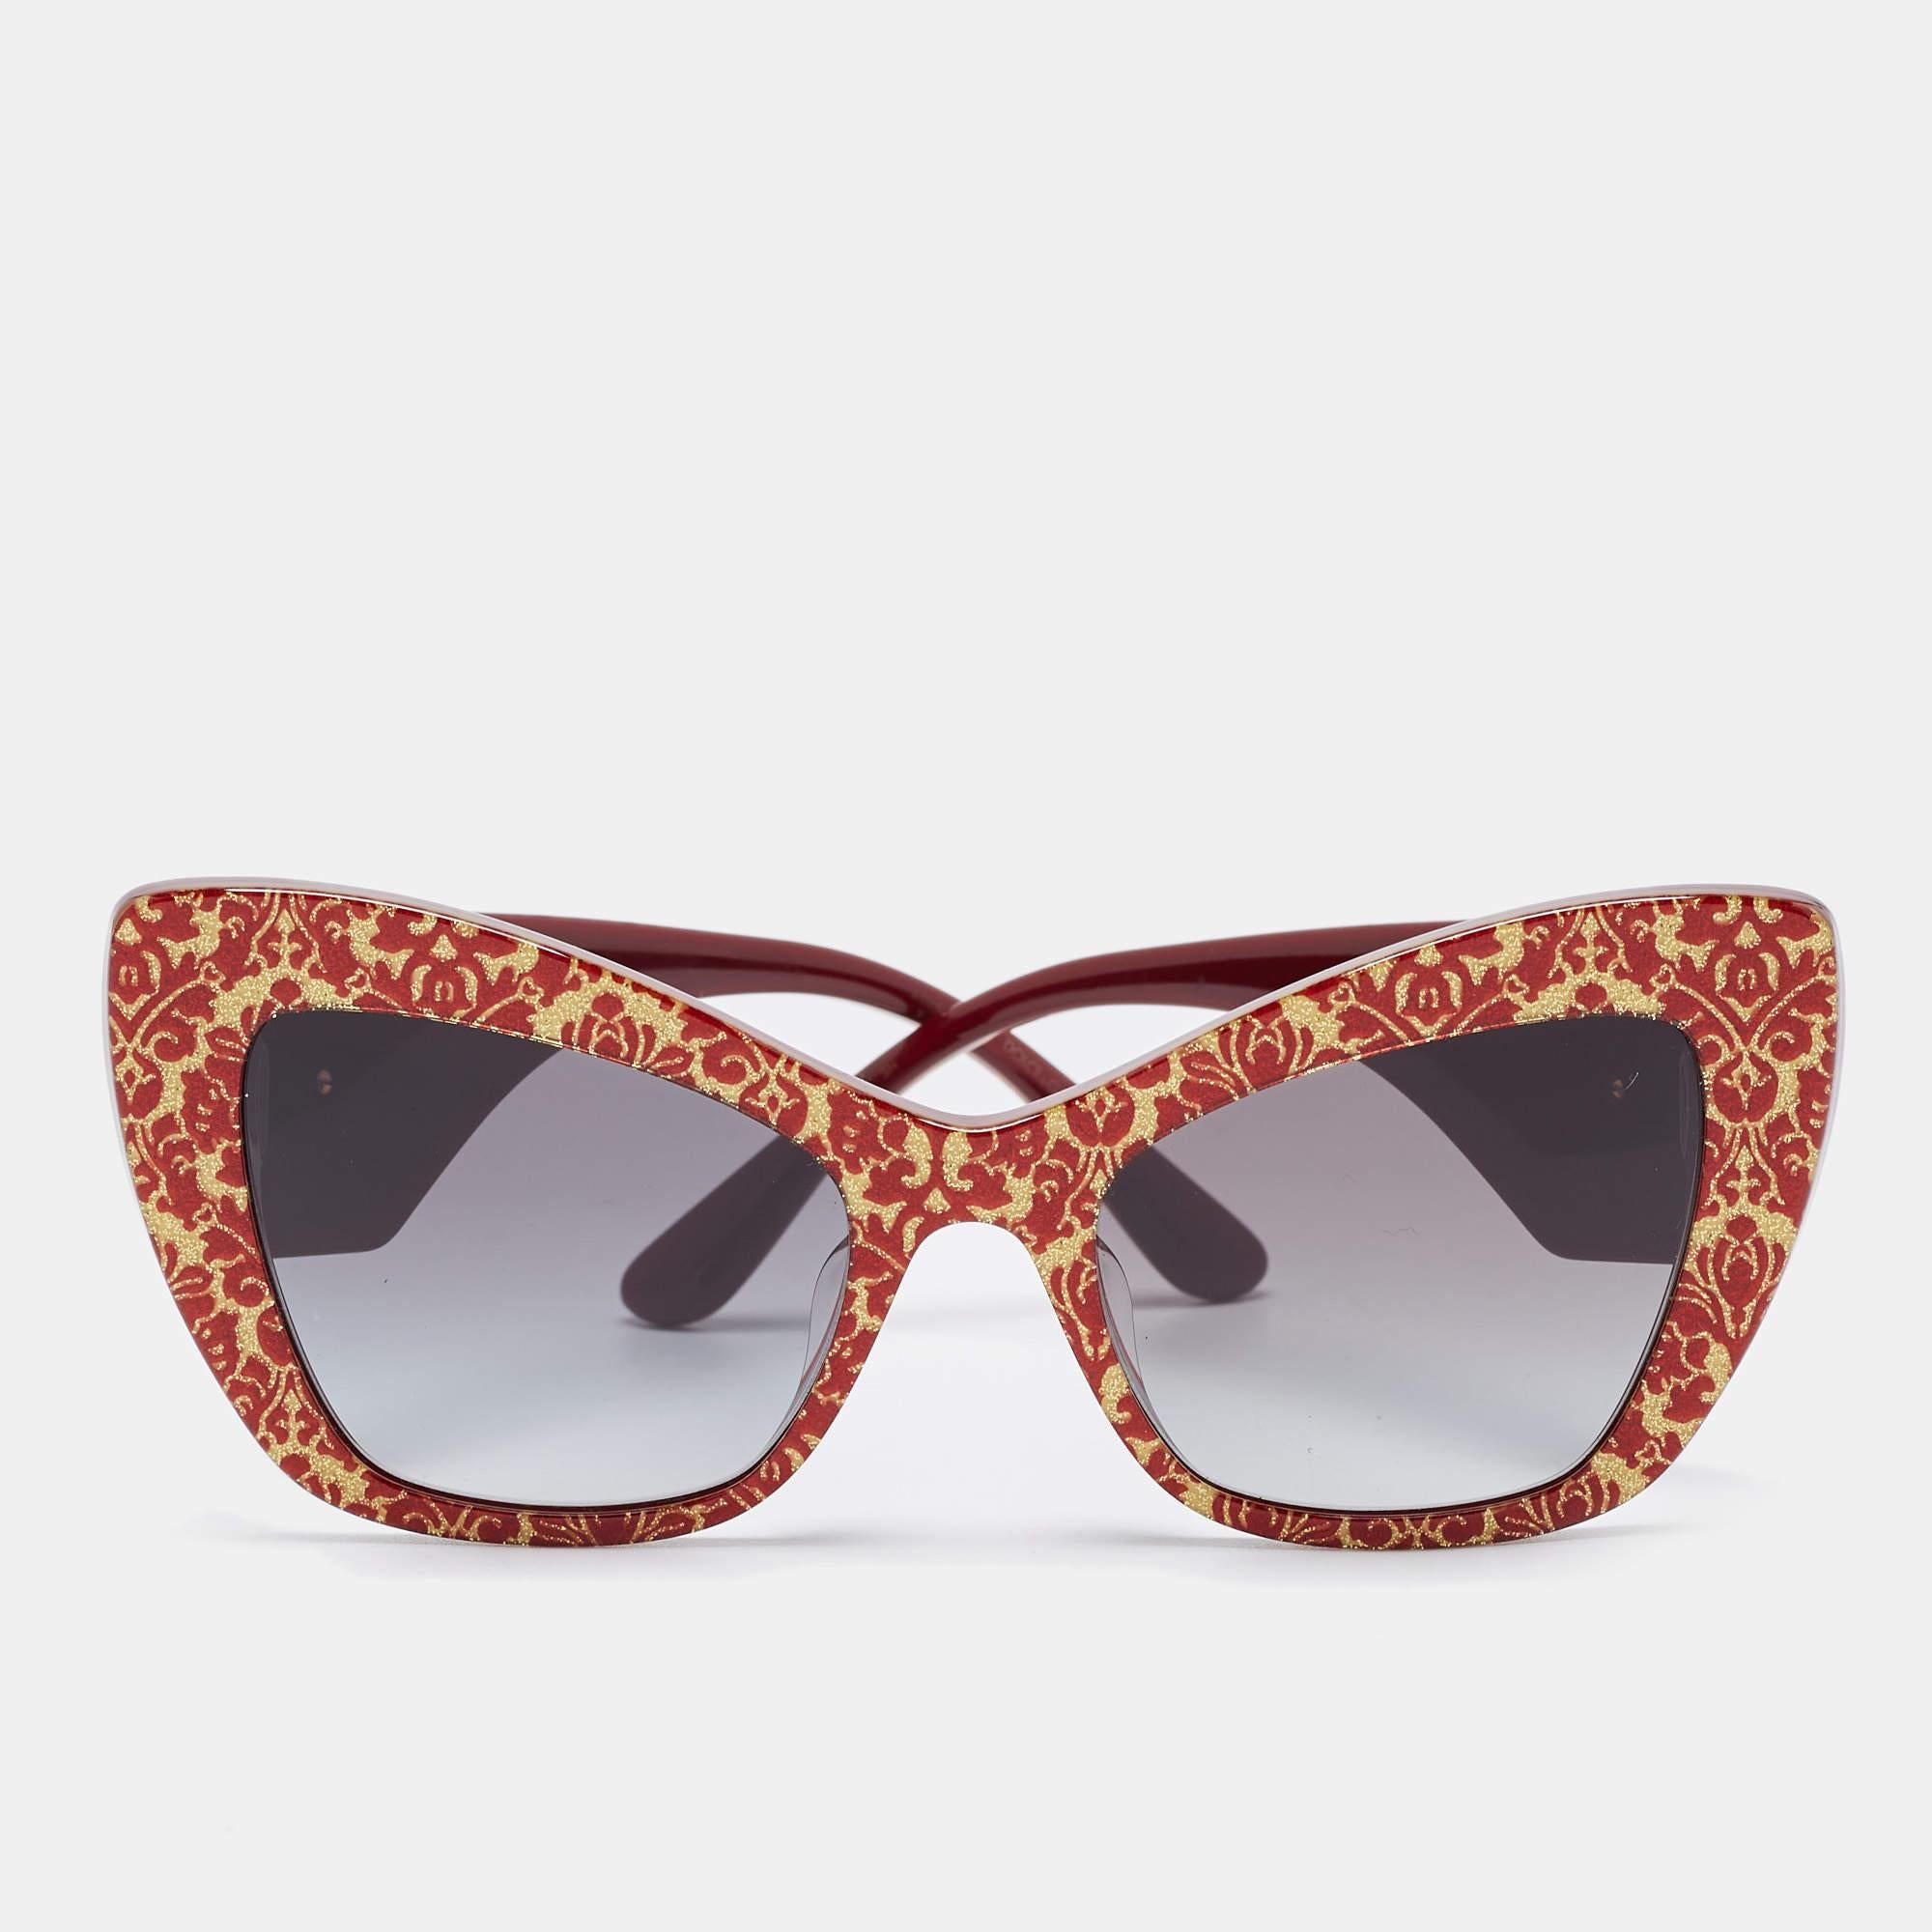 A statement pair of sunglasses from Dolce & Gabbana will surely make a prized buy. Featuring a trendy frame and lenses meant to protect your eyes, the sunglasses are ideal for all-day wear.

Includes
Original Case, Original Pouch